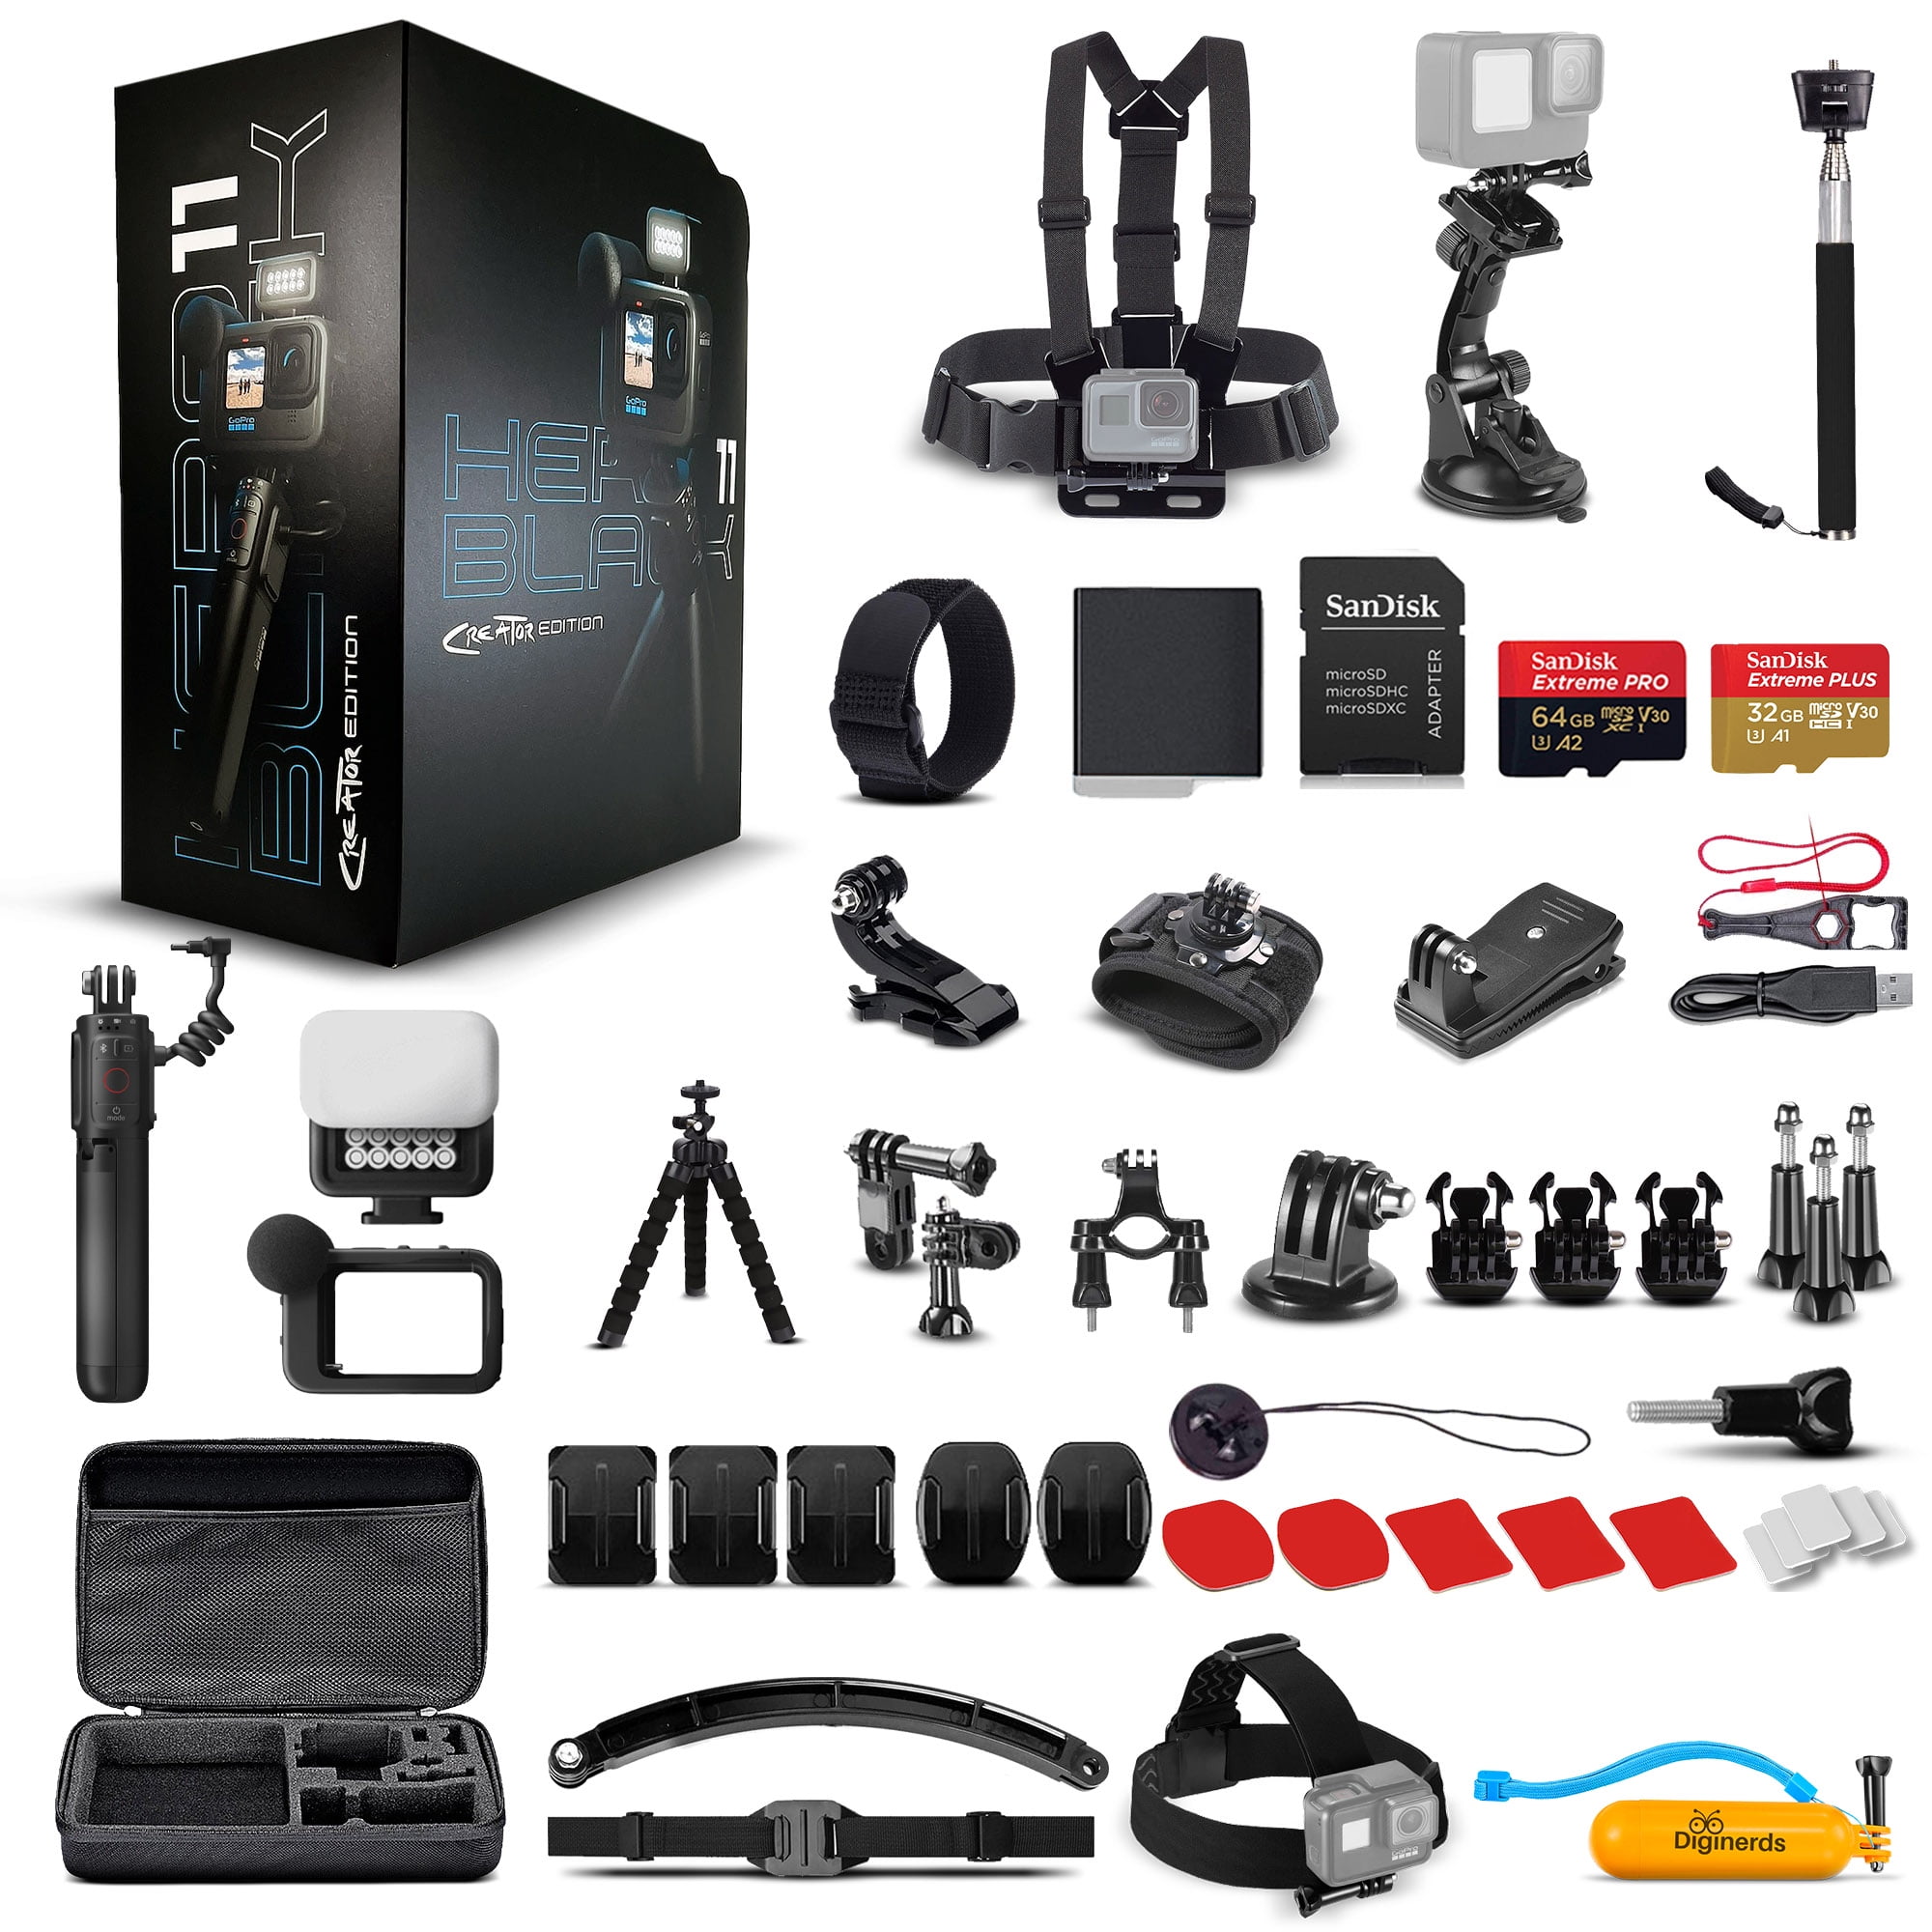 2 Action Edition Remote), 50 Mod, Includes Piece Black Camera + (HERO Waterproof Grip, and Extra Media Volta Batteries Card, HERO11 - Creator Light 11) Tripod, - 64GB GoPro Mod, (Battery Kit Accessory